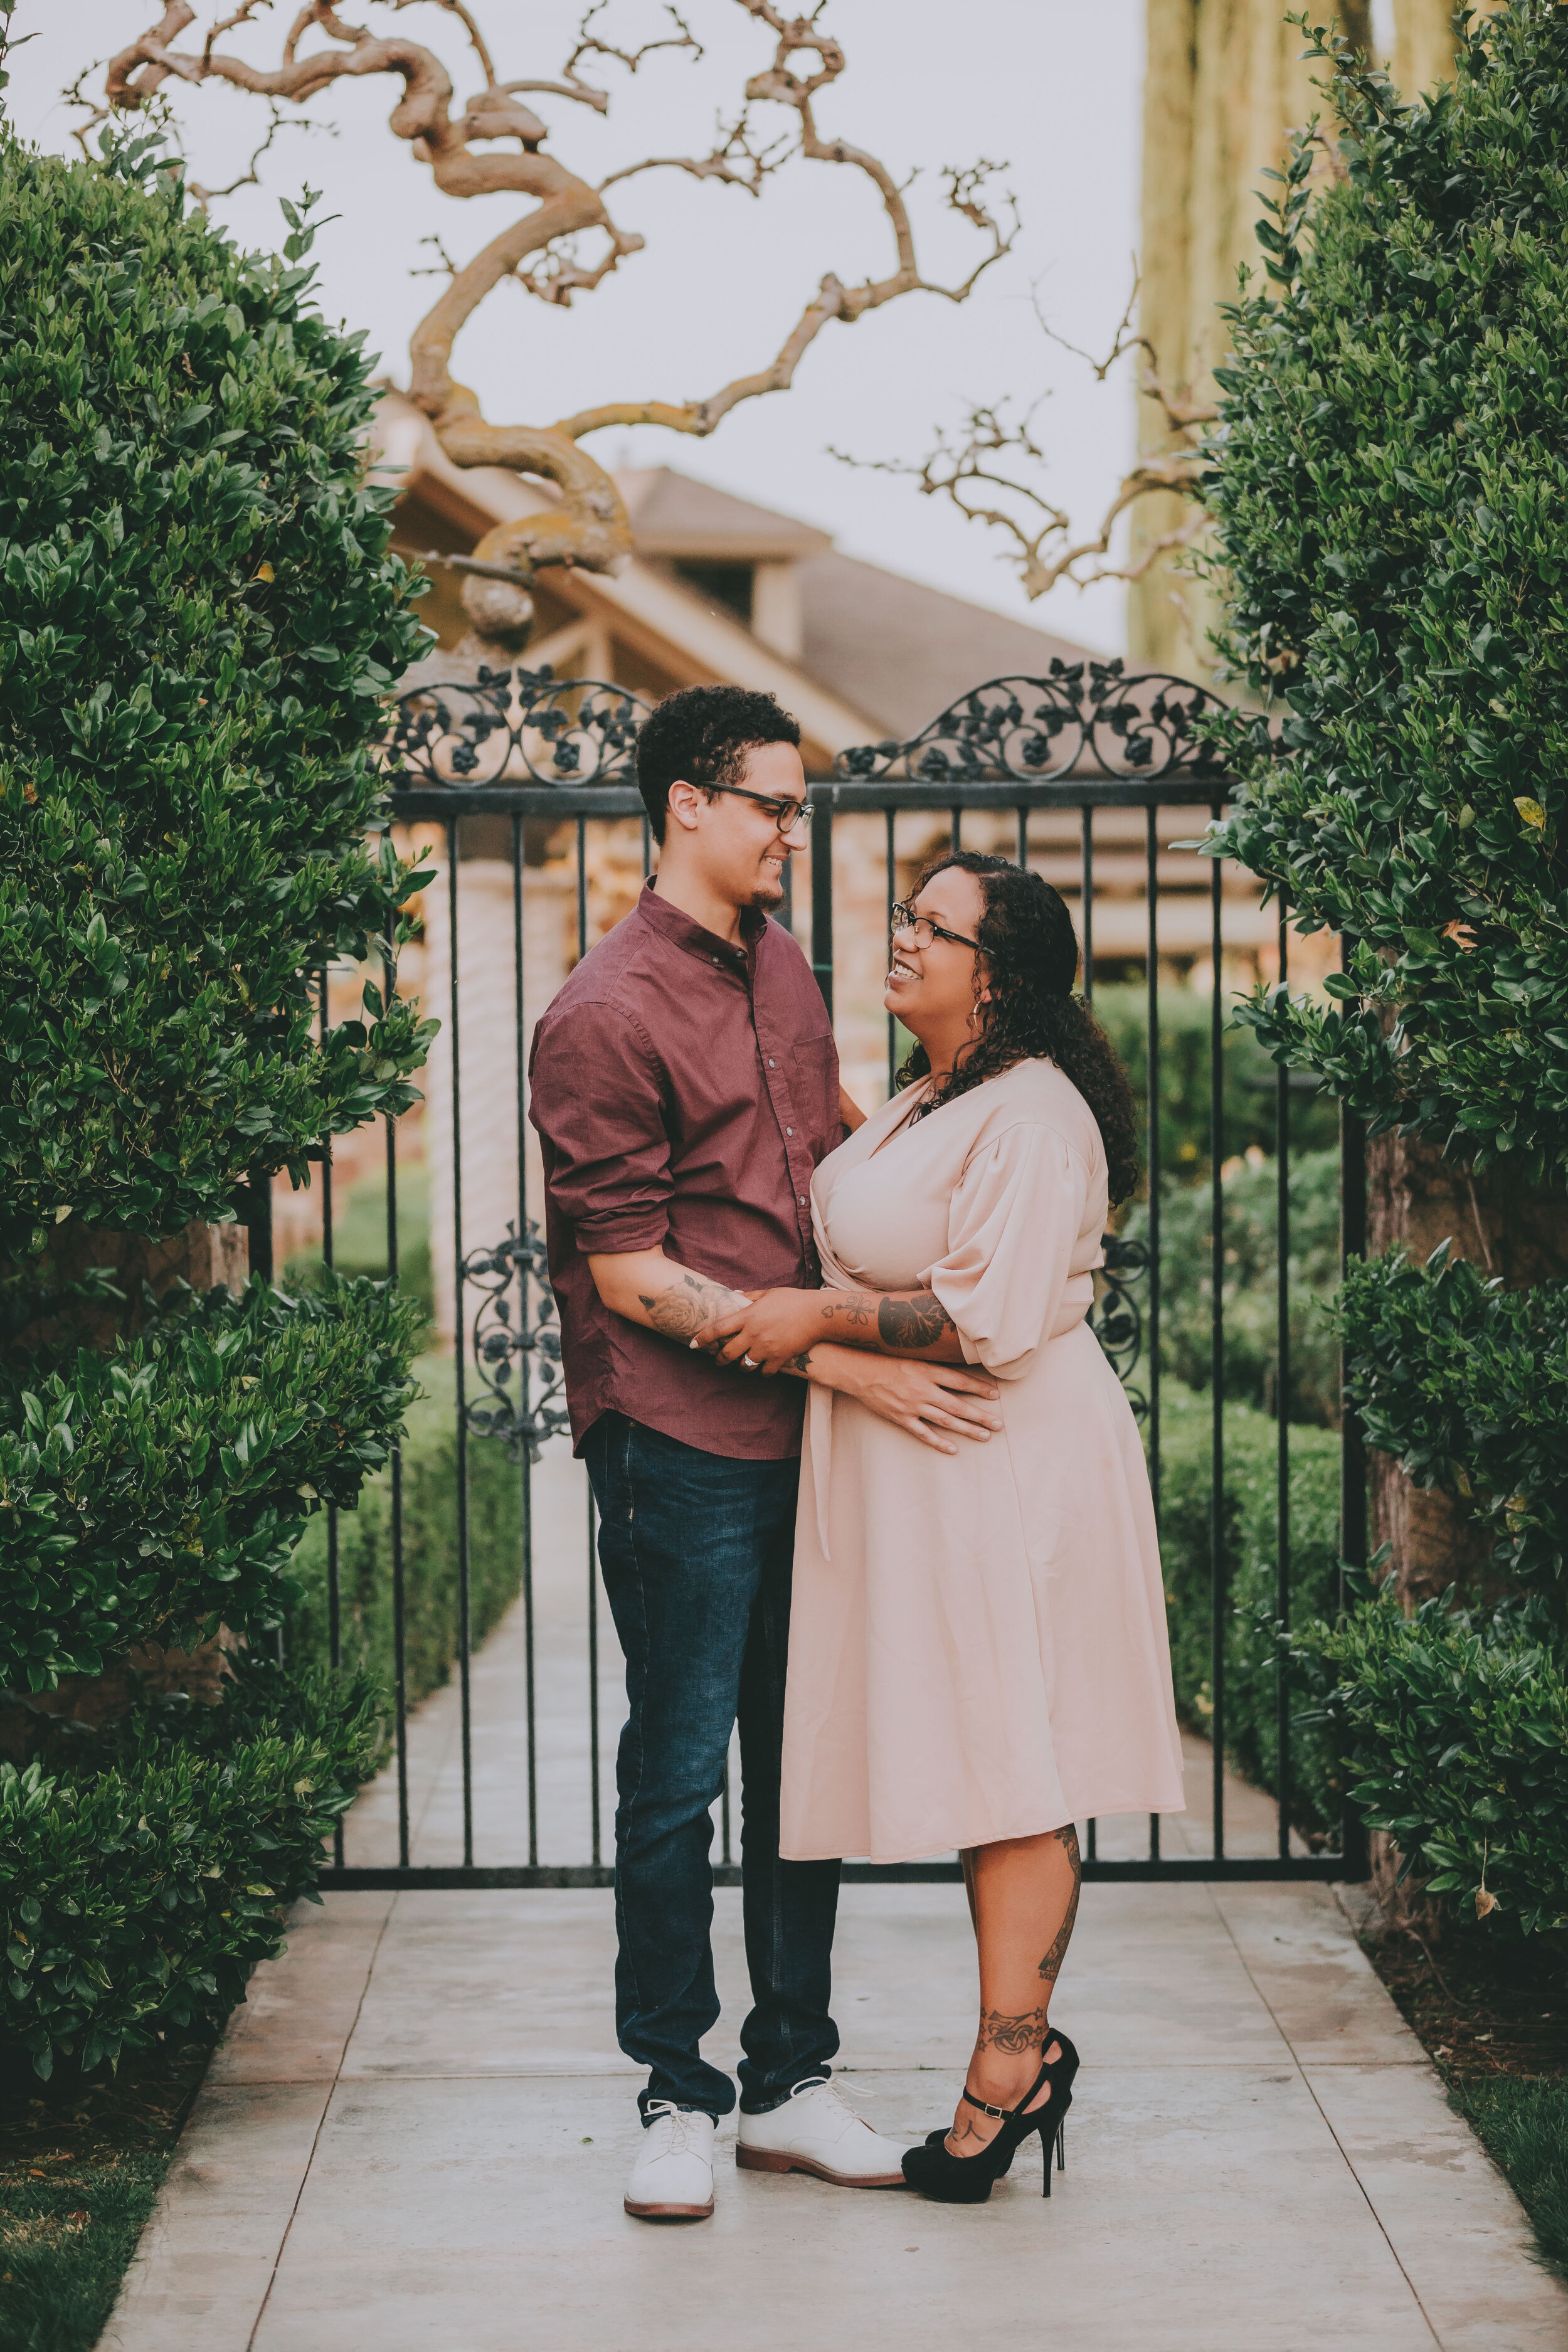 Fresno Engagament Photos - Wolf Lakes - The Clausen Gallery - Aleksis and Scott -15.jpg